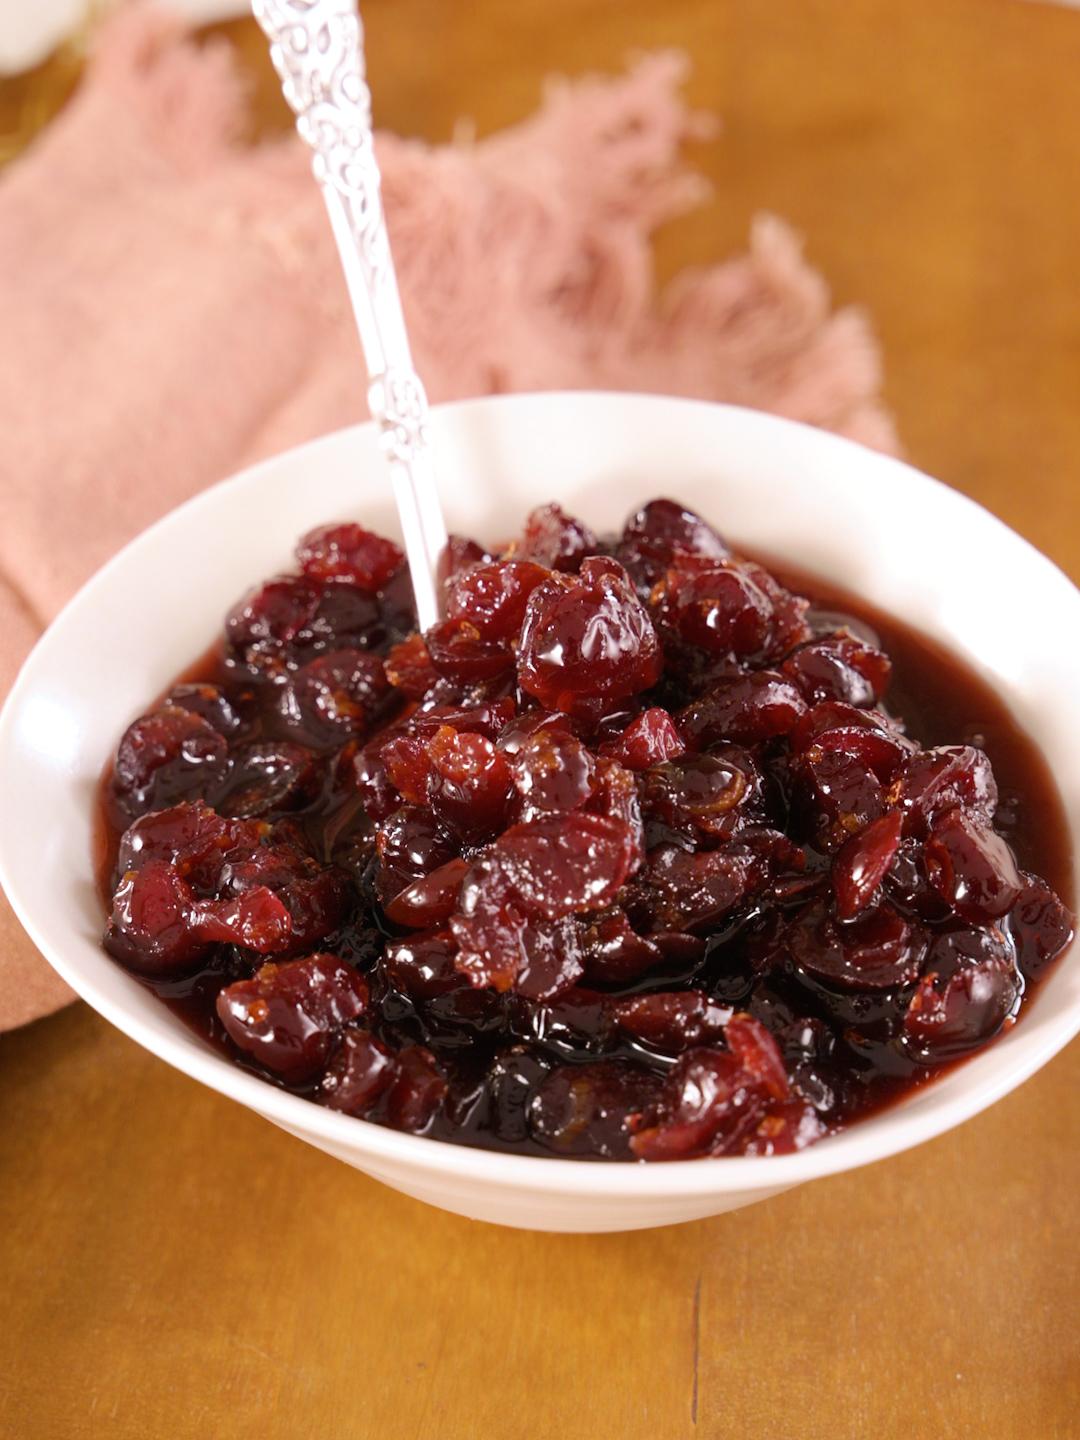 Spiced Cranberry and Orange Sauce